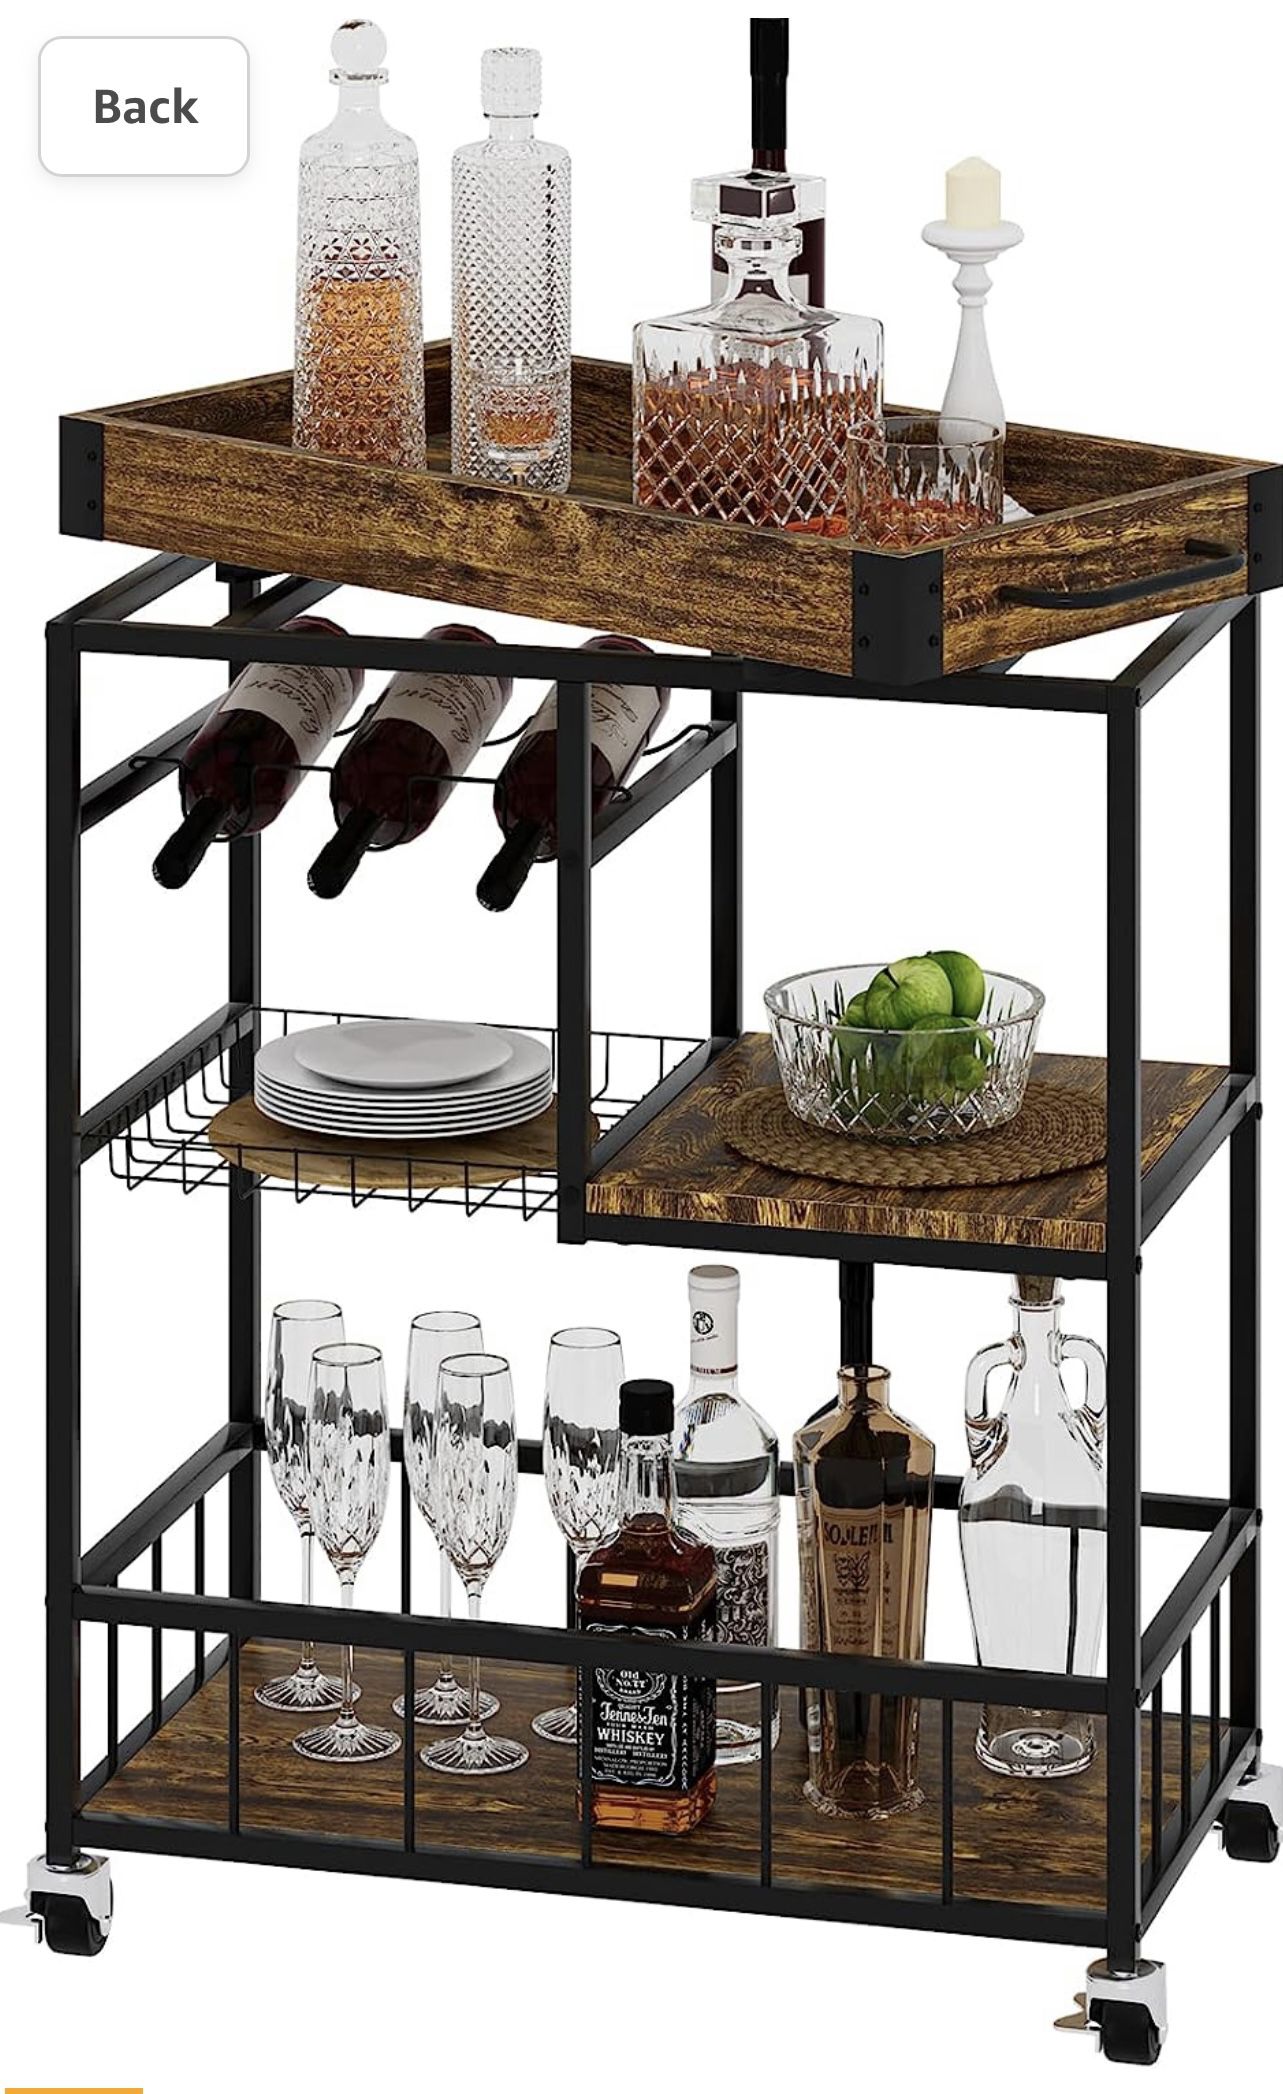 Bar Cart Wine Glass 3 with Basket Tier Home Rolling Rack with Wheels Mobile Kitchen Industrial Vintage Style Wood Metal Serving Trolley Serving Cart,G